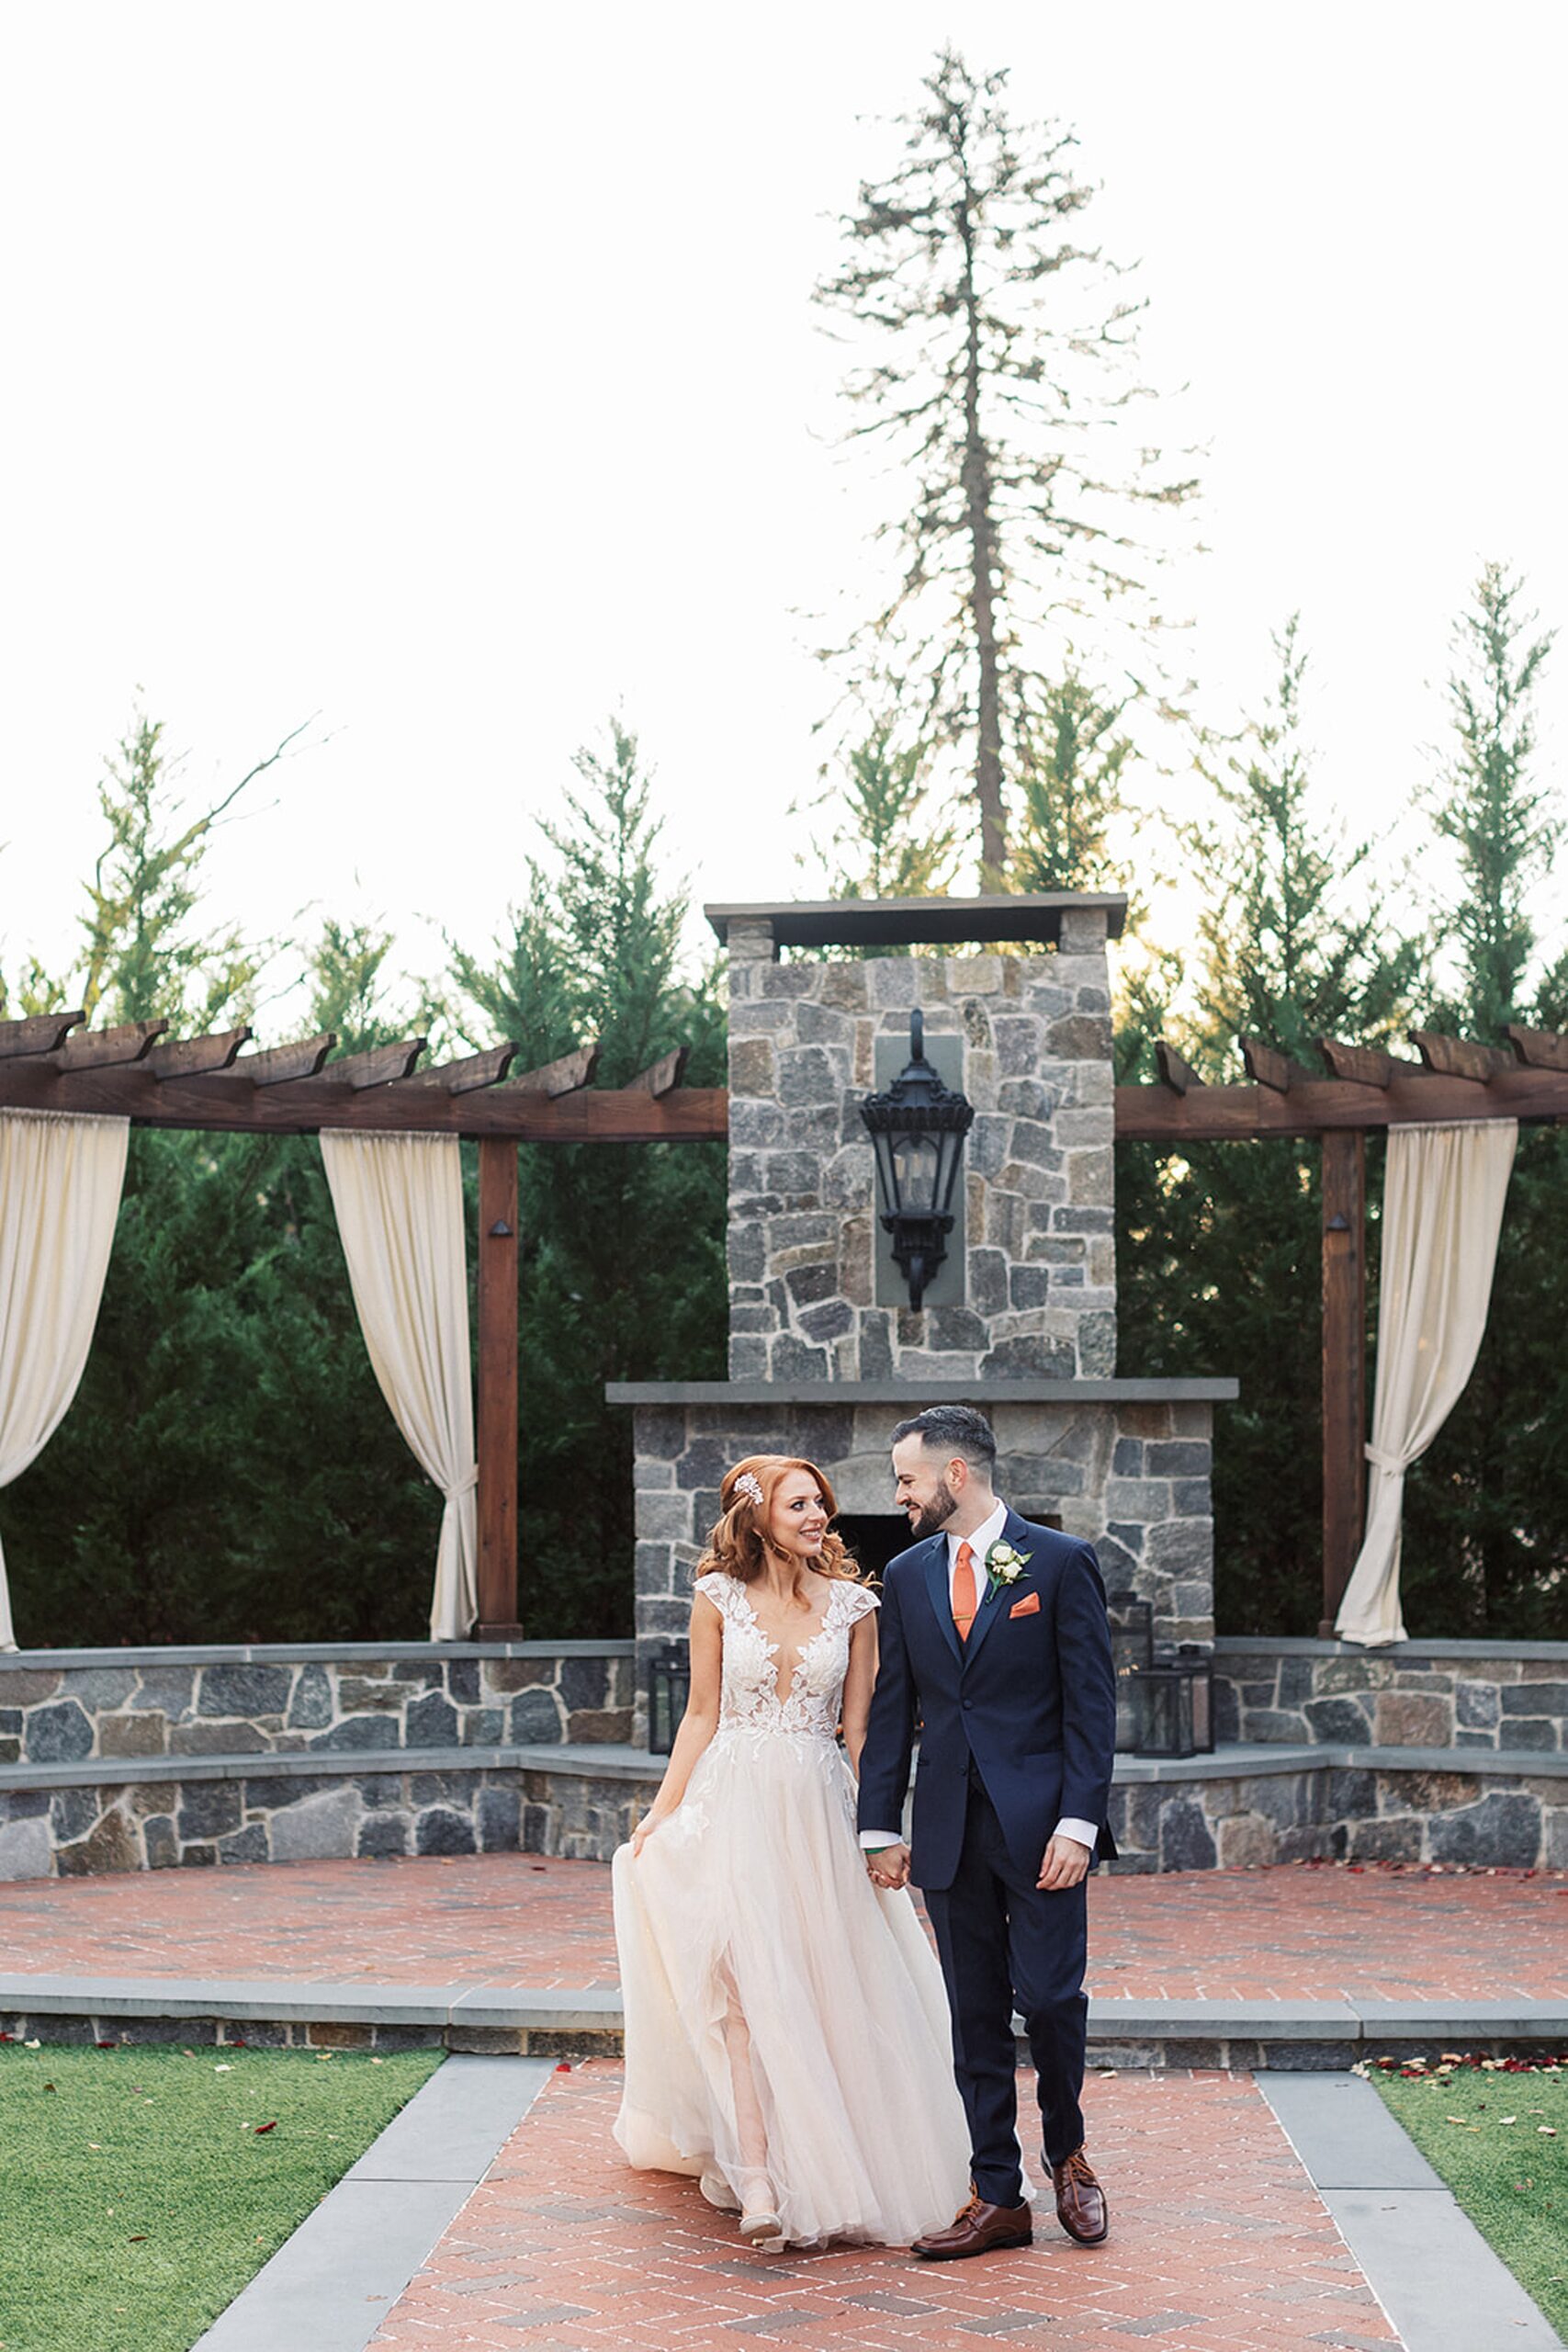 A bride and groom smile at each other while walking down a brick path past a stone fireplace